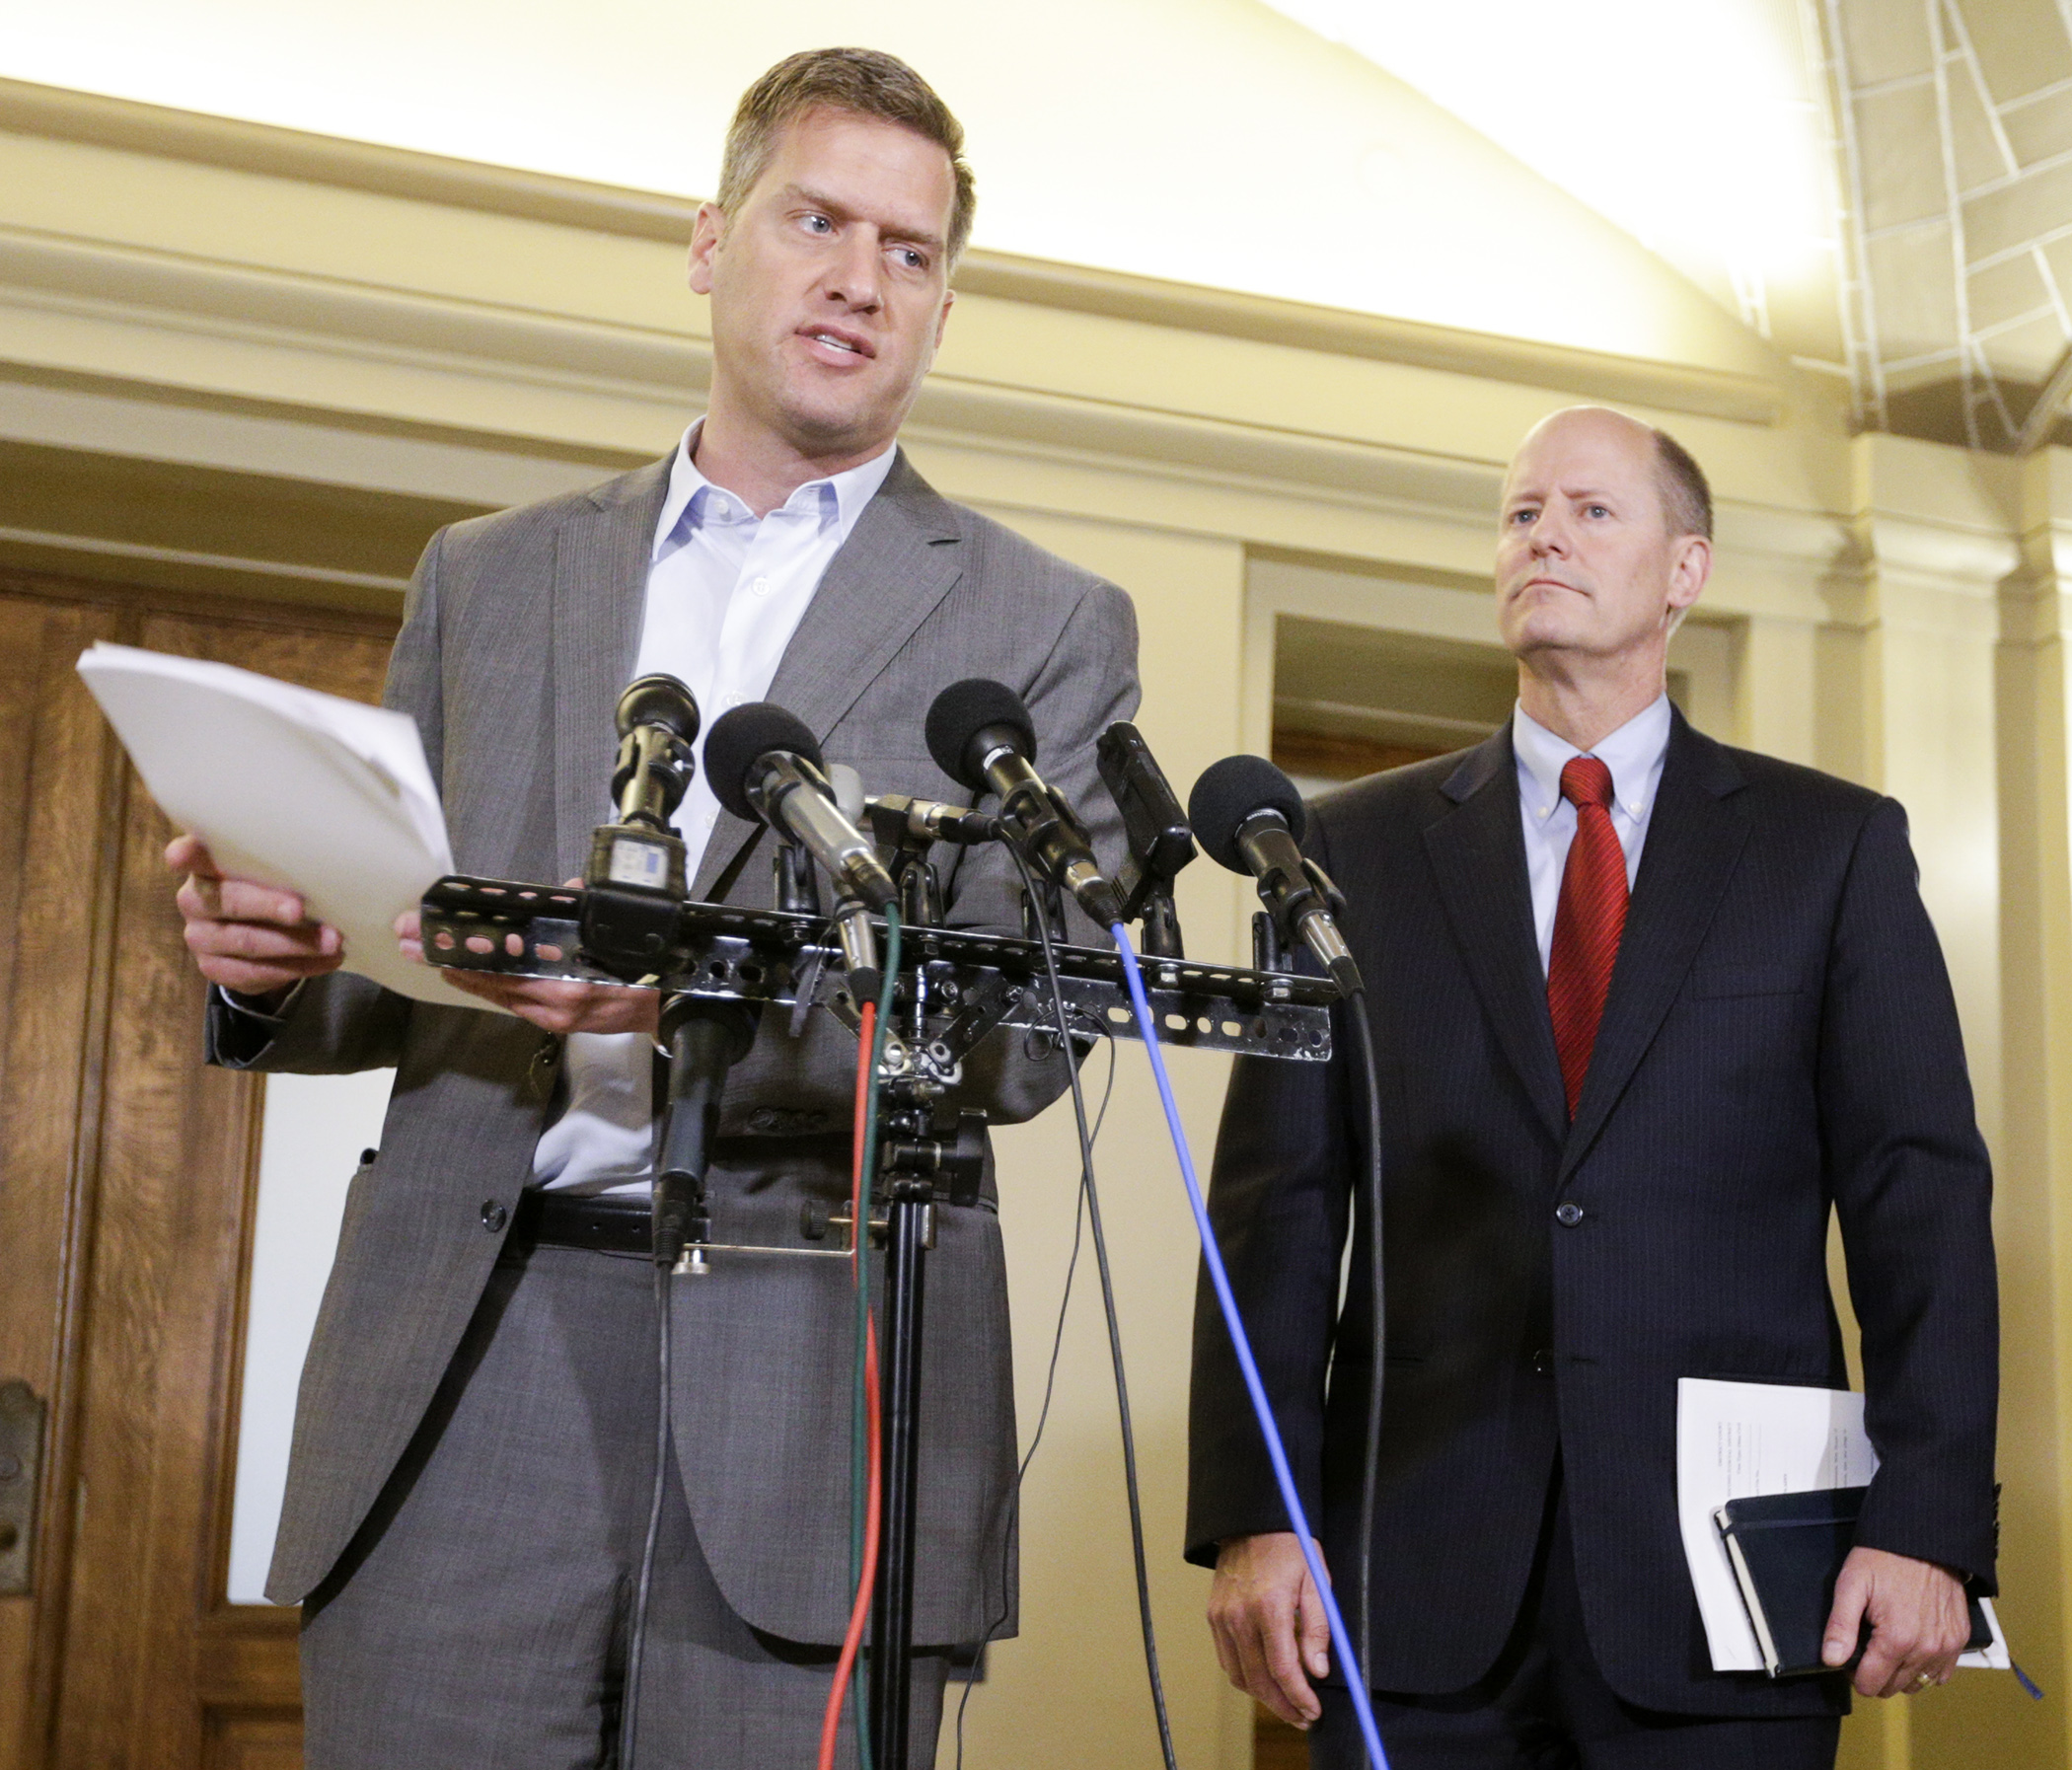 House Speaker Kurt Daudt holds a copy of the court papers he said would be filed Tuesday in the Legislature’s dispute with Gov. Mark Dayton over his line-item veto of House and Senate funding. Photo by Paul Battaglia